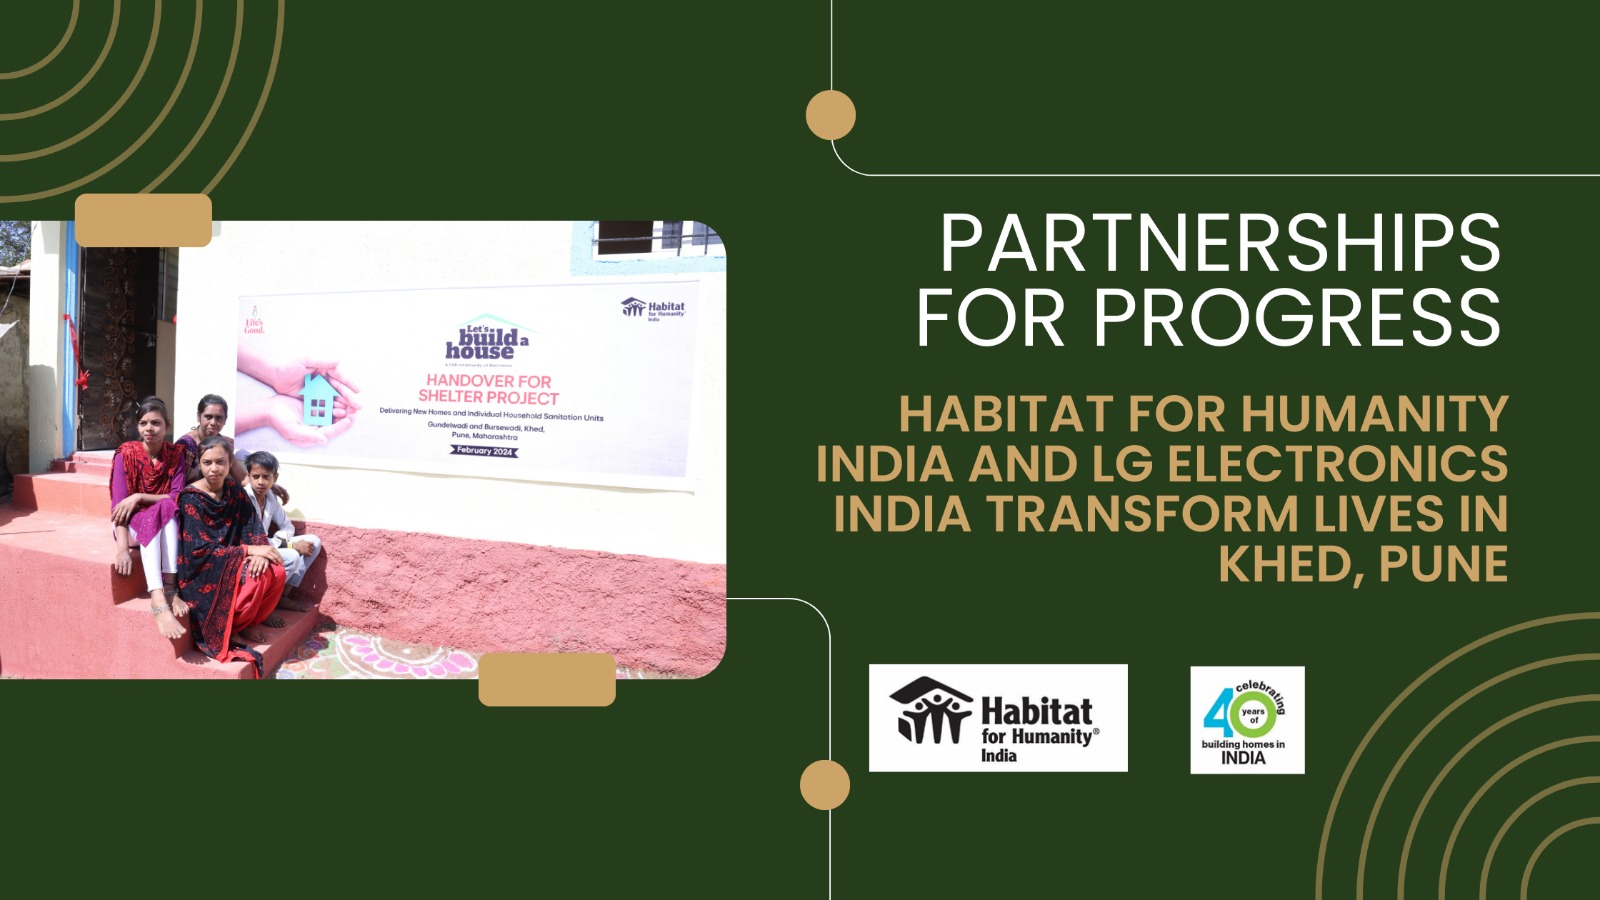 Habitat for Humanity India and LG Electronics India Handover ‘Let’s Build a House’ Project, Delivering 18 Homes and 40 Sanitation Units in Khed, Pune